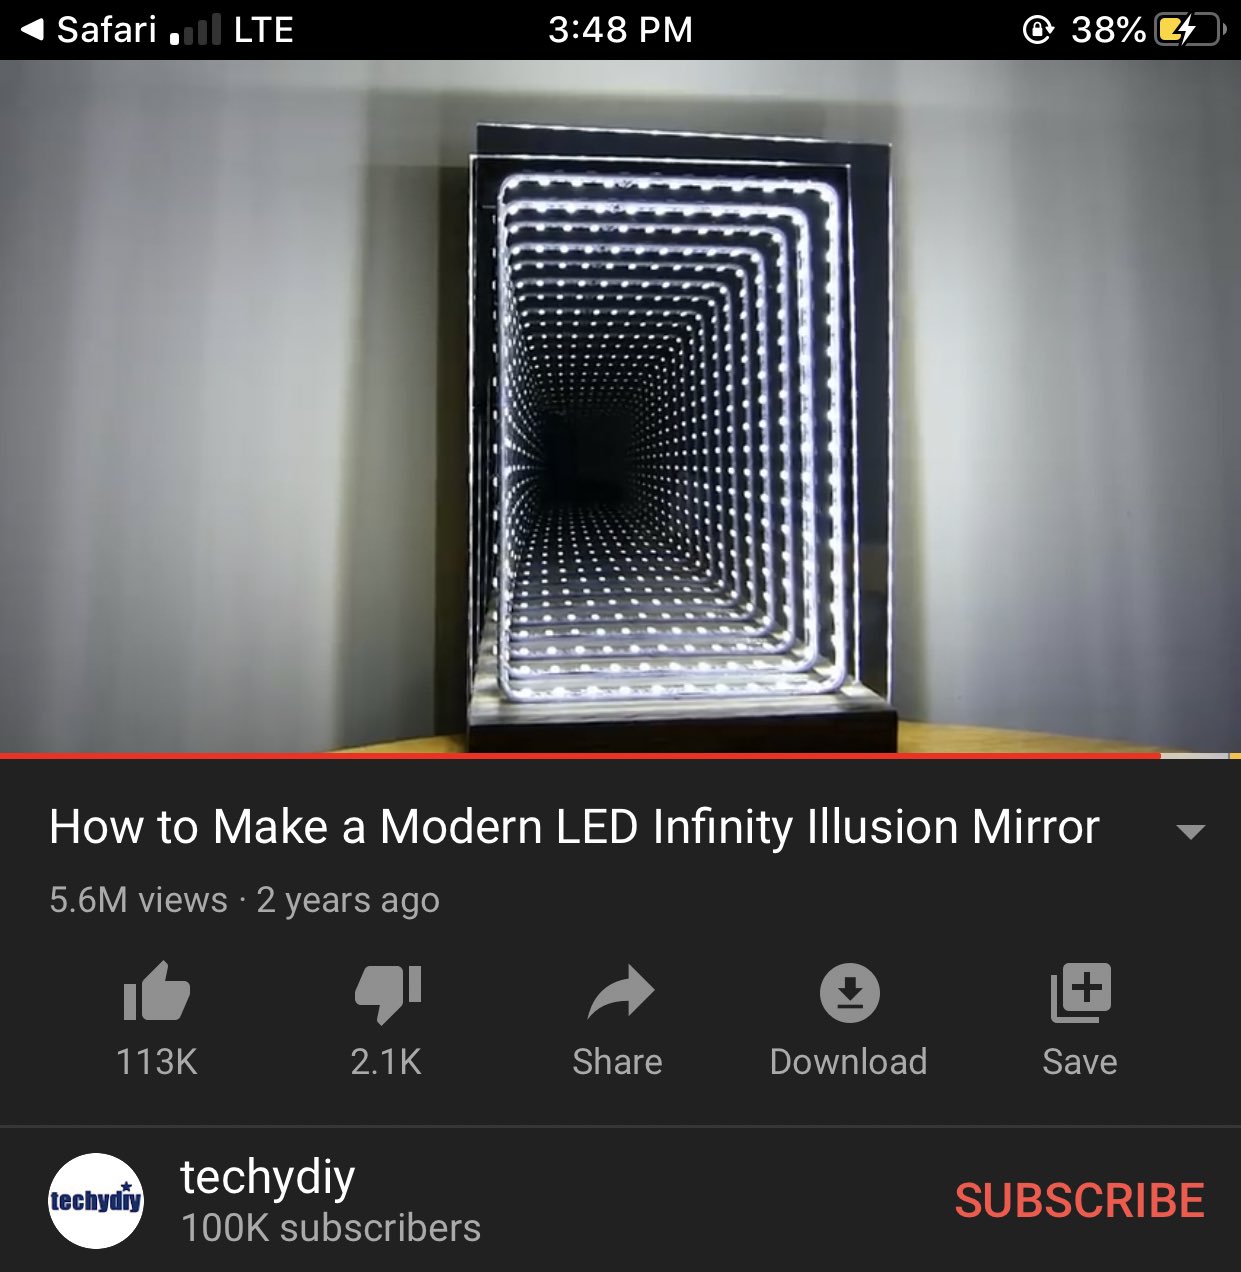 How to Make a Modern LED Infinity Illusion Mirror 